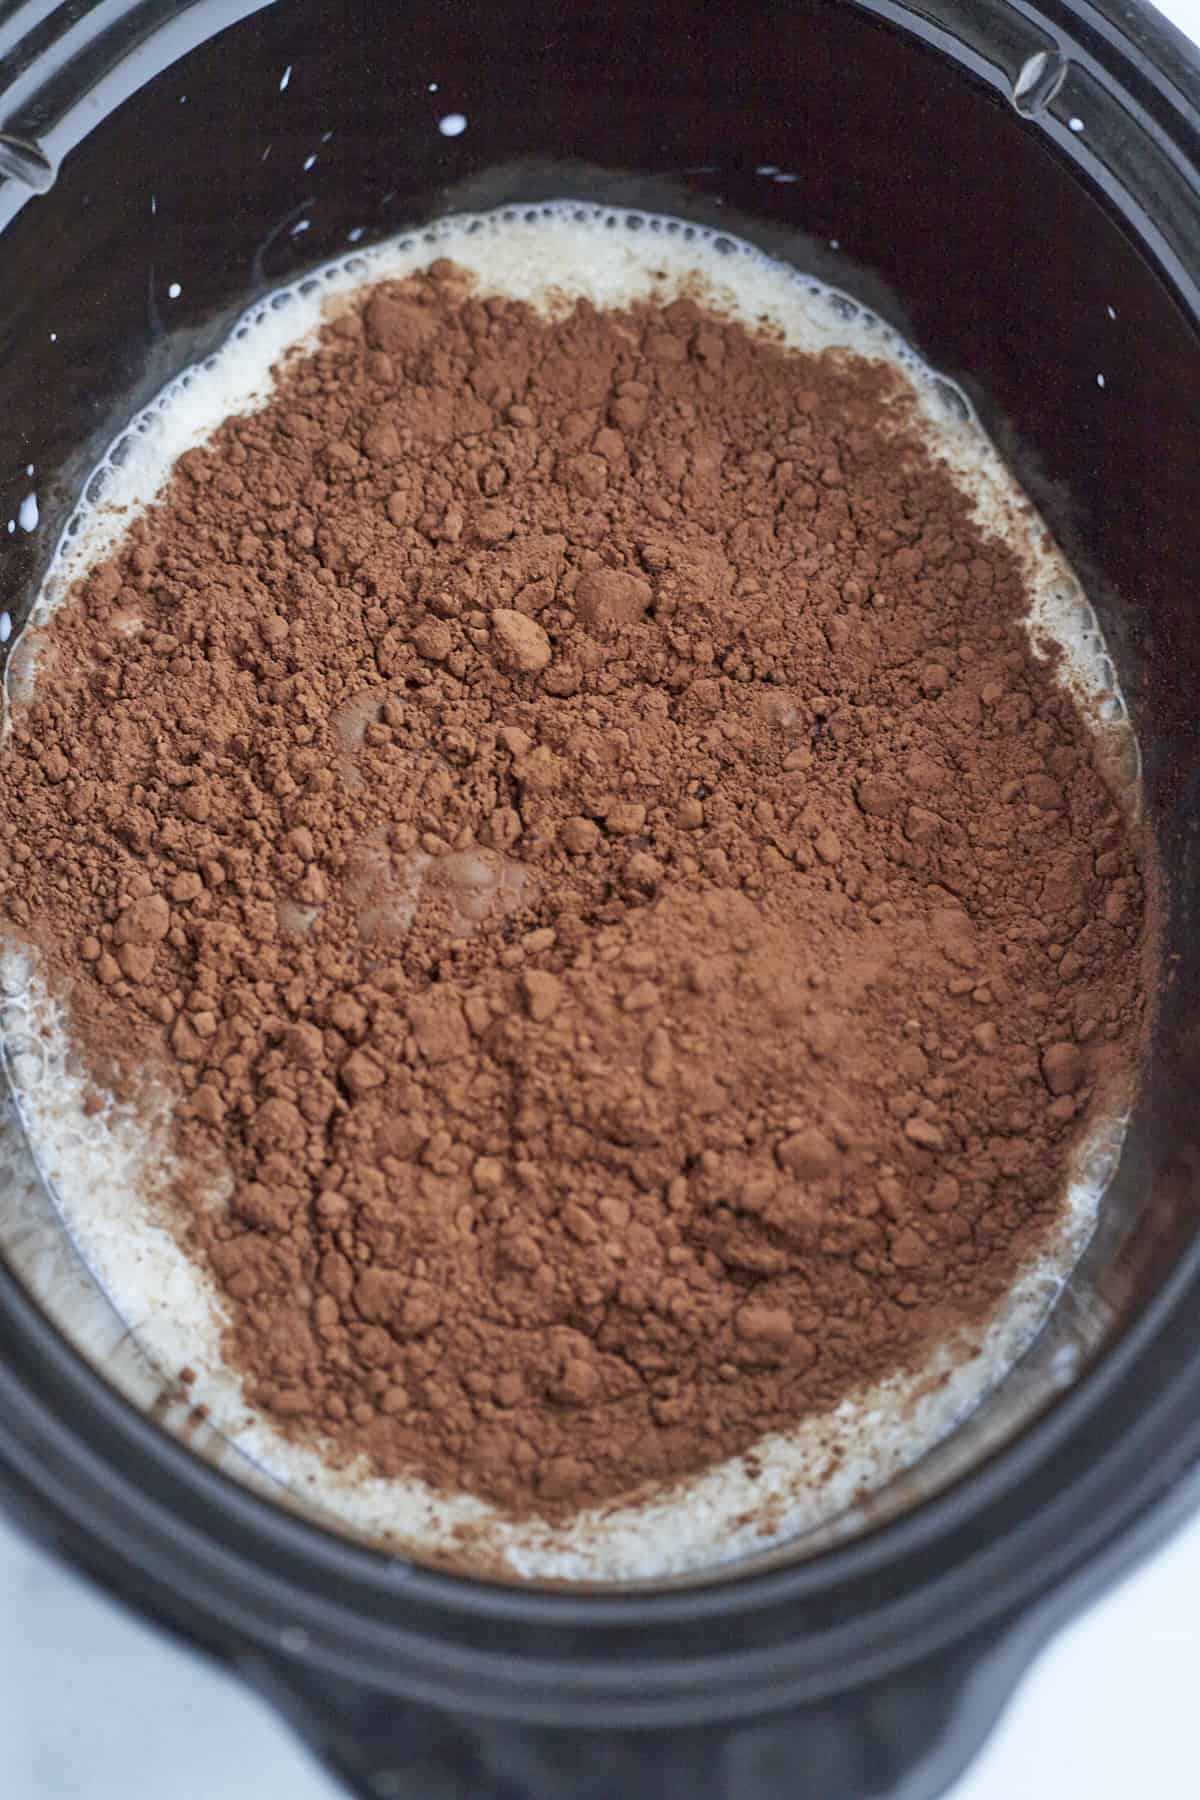 milk, heavy creamy, cocoa powder, and sugar in a slow cooker to make hot chocolate